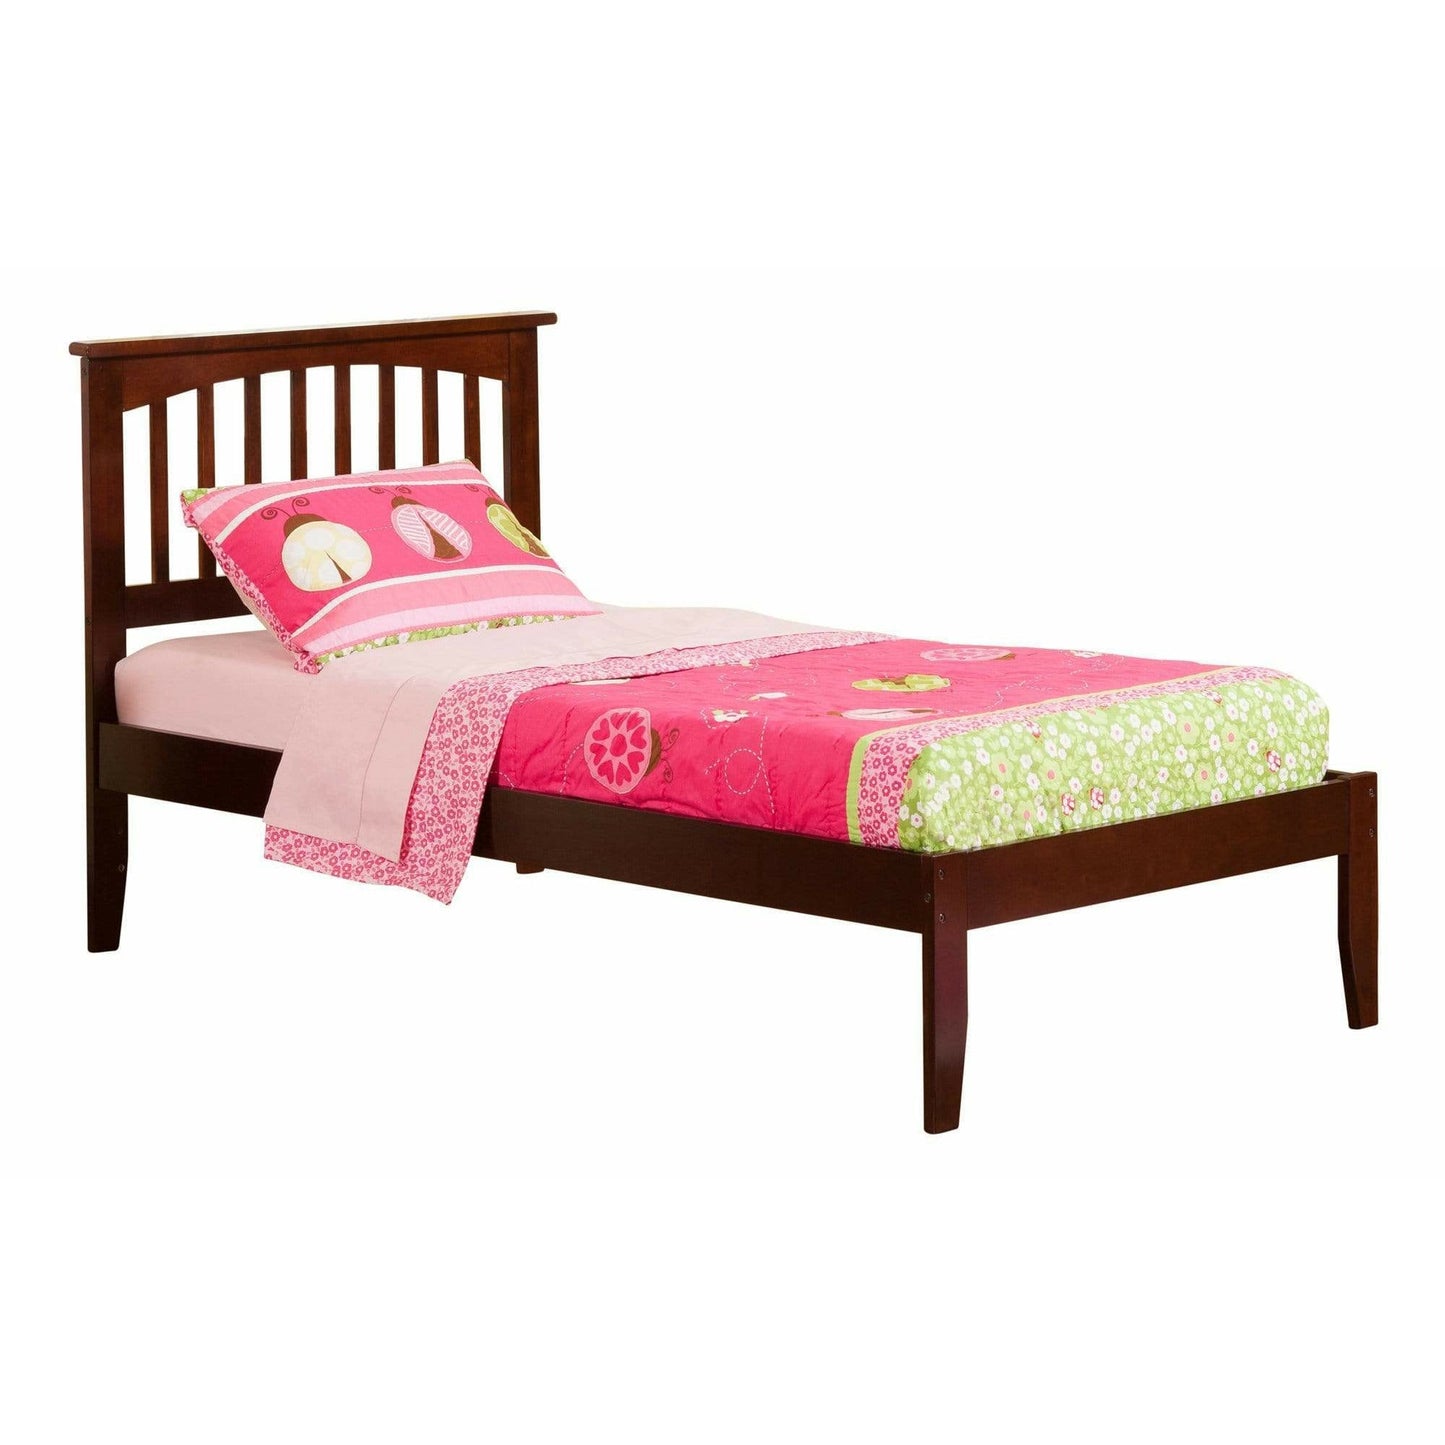 Atlantic Furniture Bed walnut Mission Twin Platform Bed with Open Foot Board in Espresso